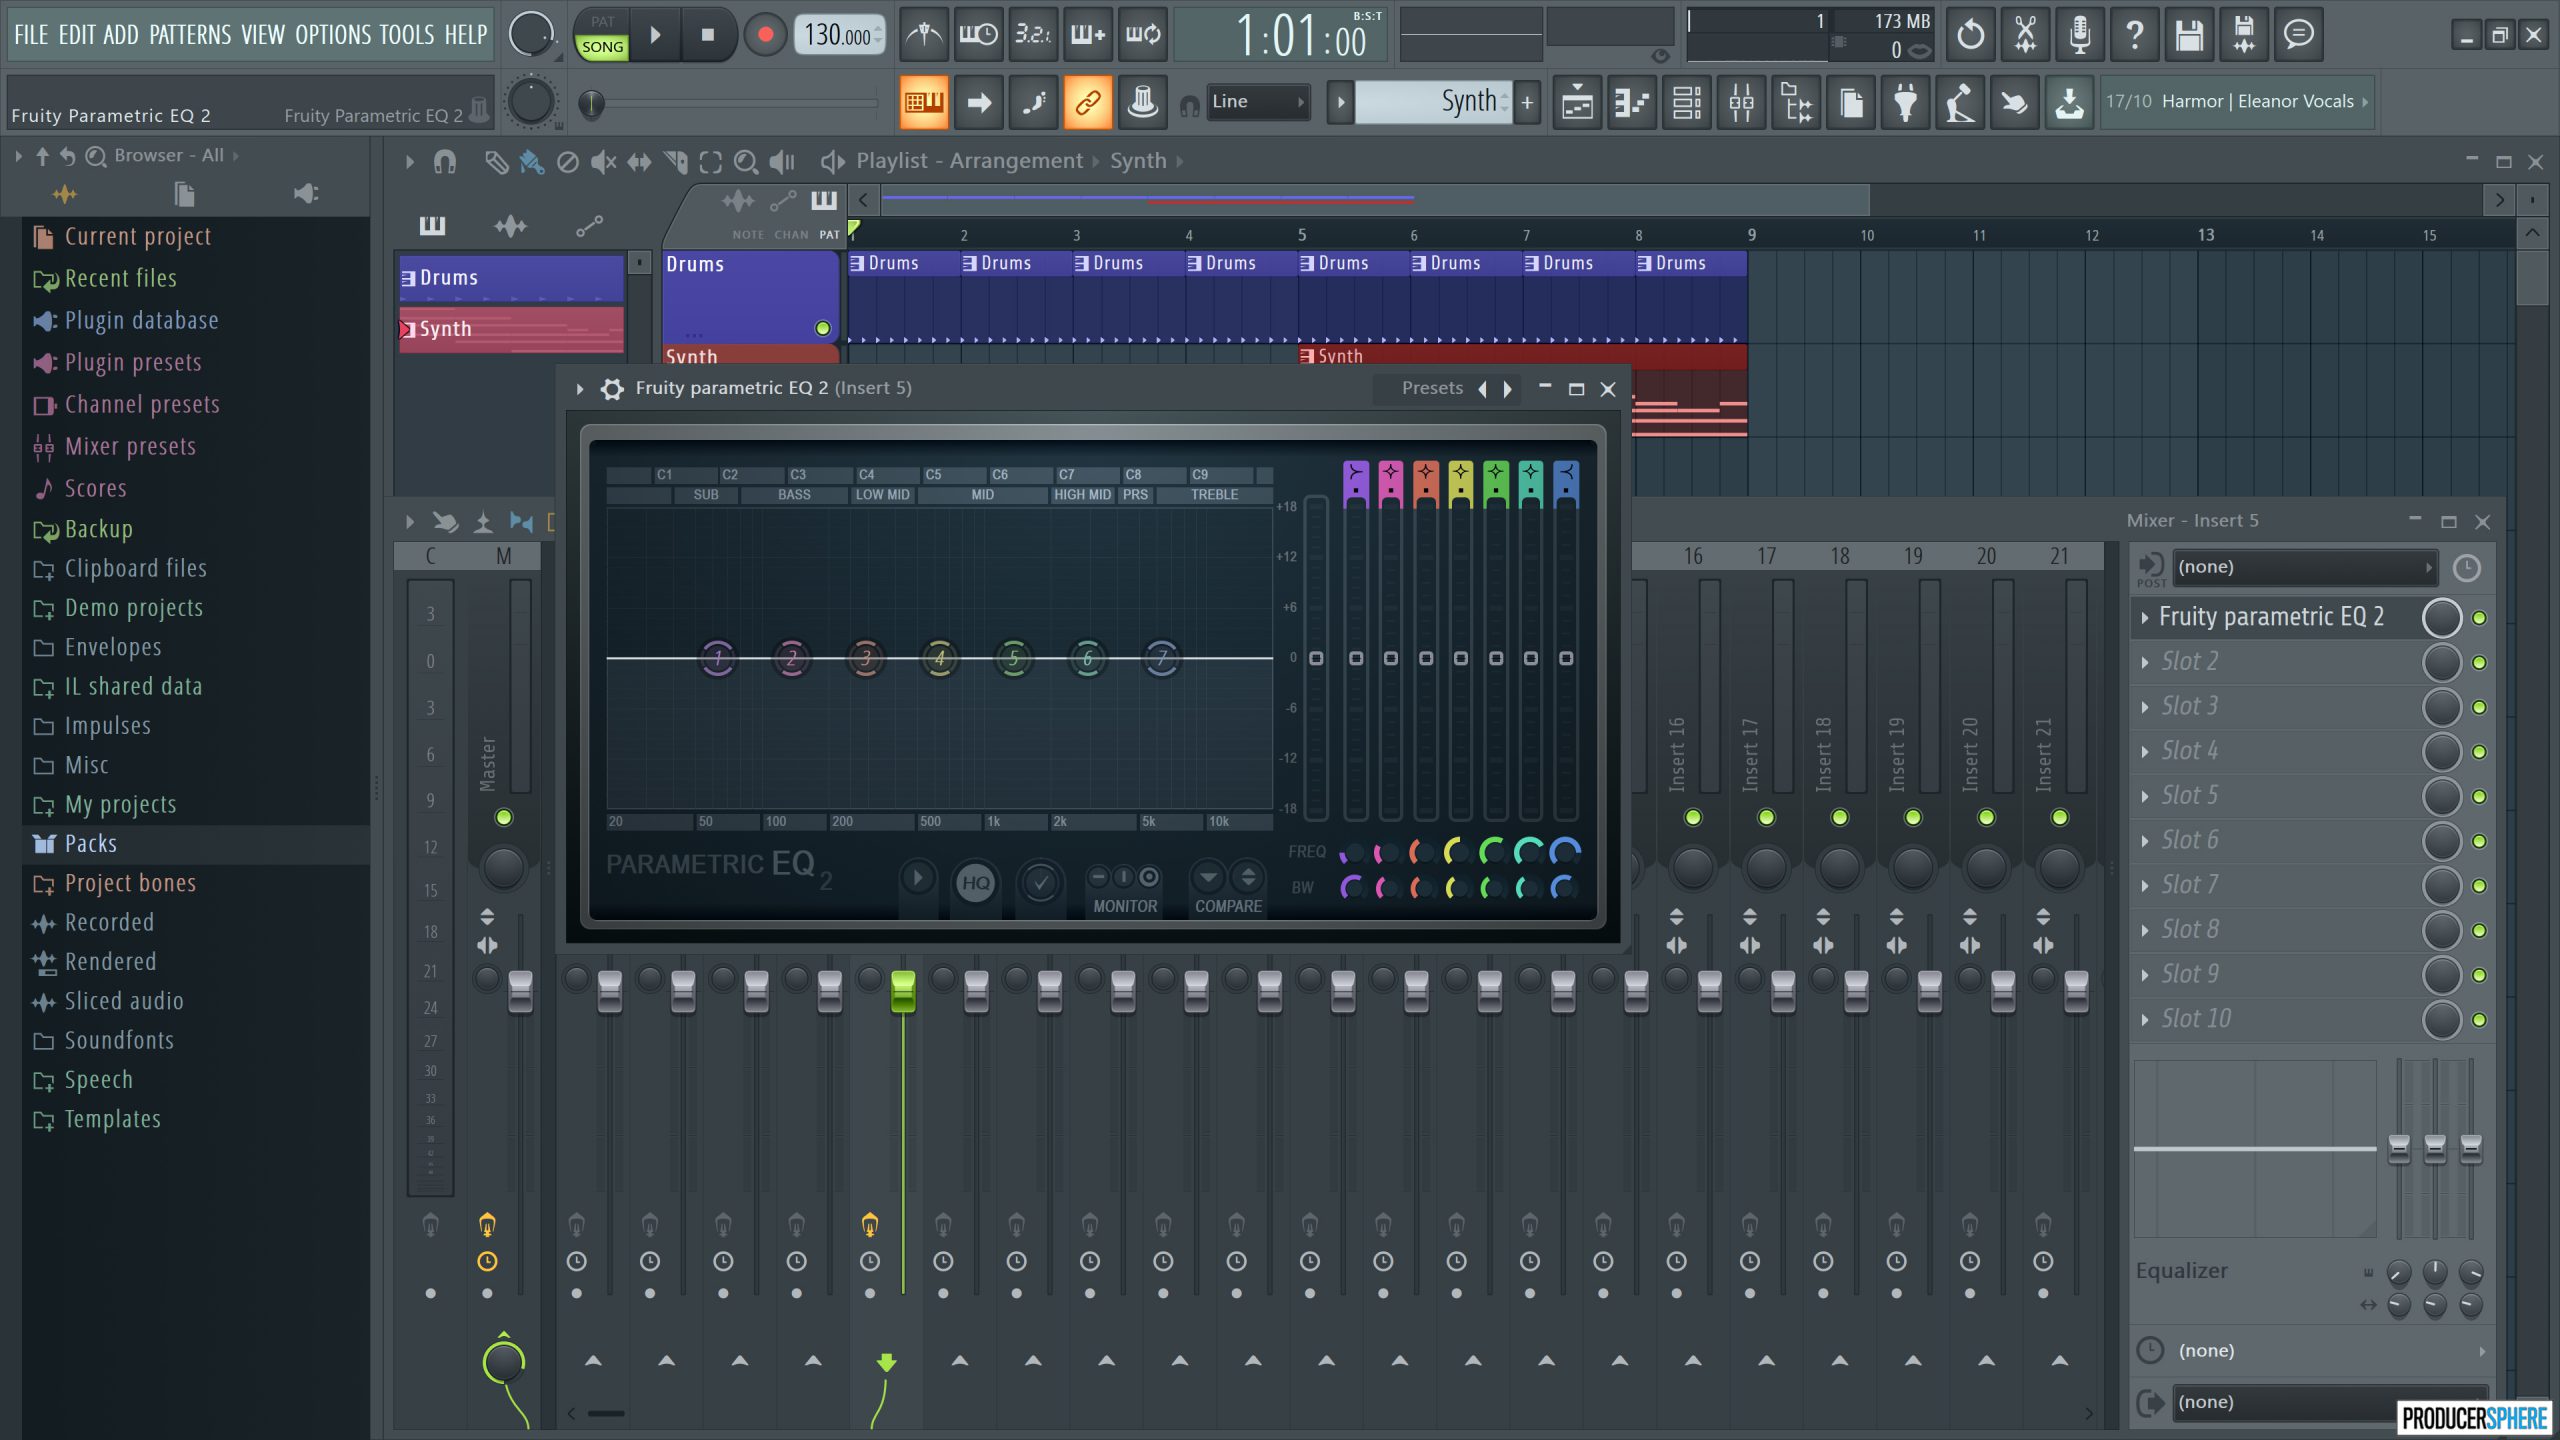 How to get fl studio for free windows 10